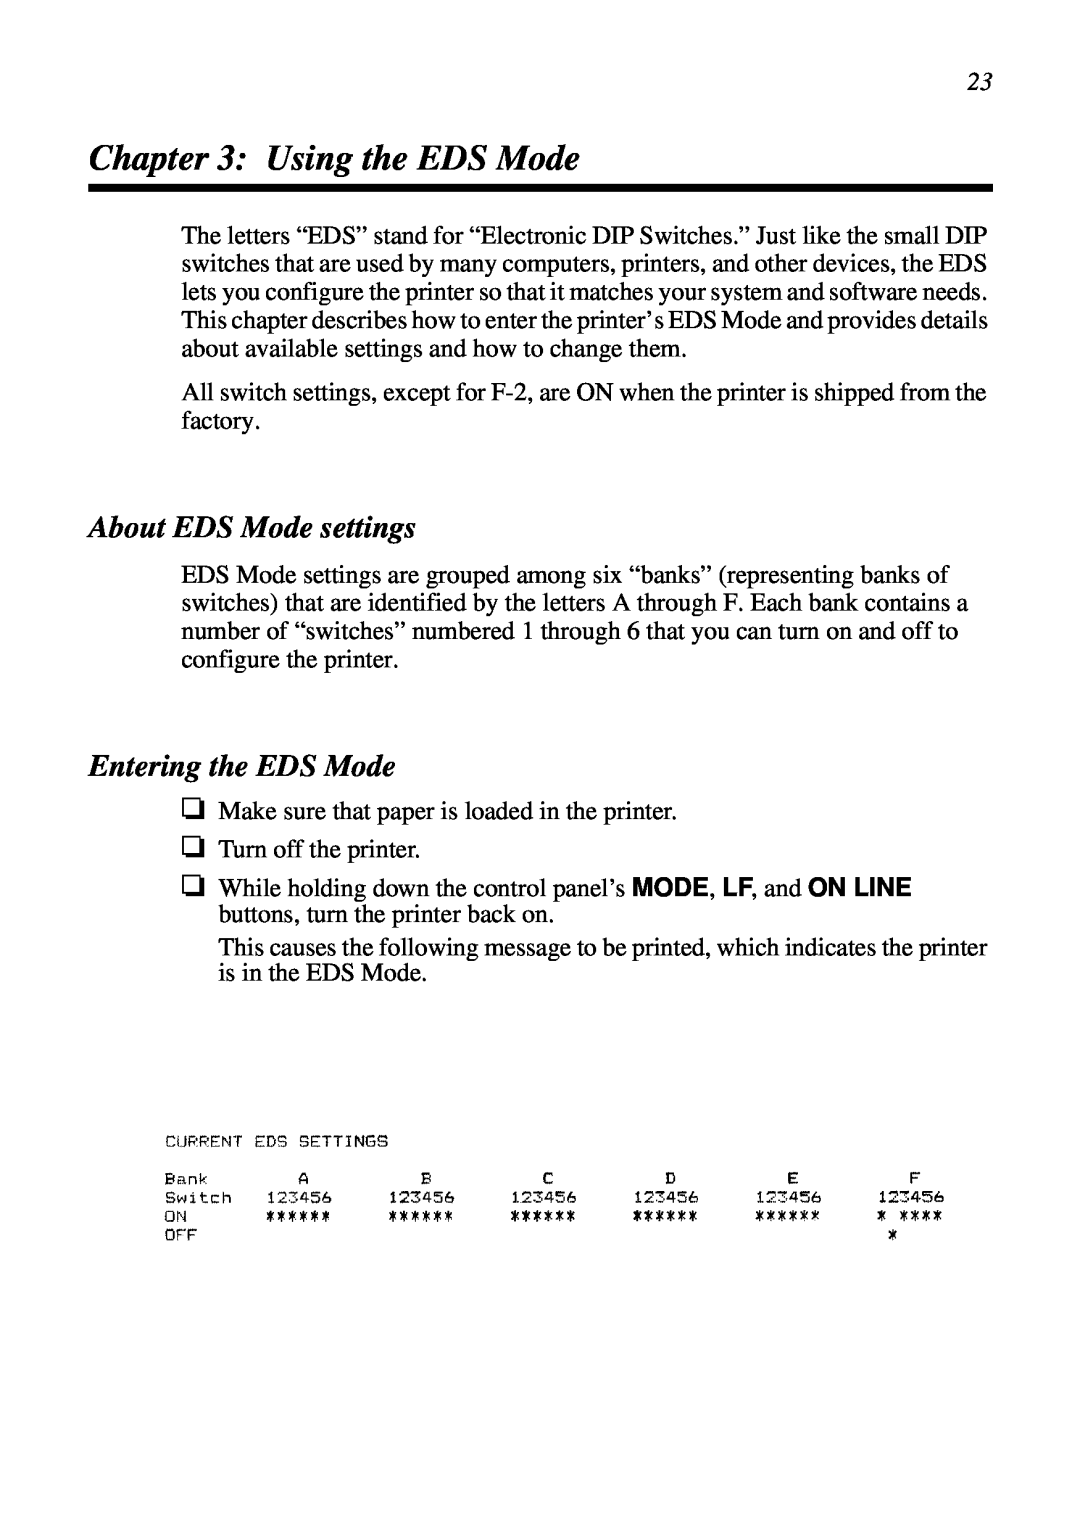 Star Micronics LC-7211 user manual Using the EDS Mode, About EDS Mode settings, Entering the EDS Mode 